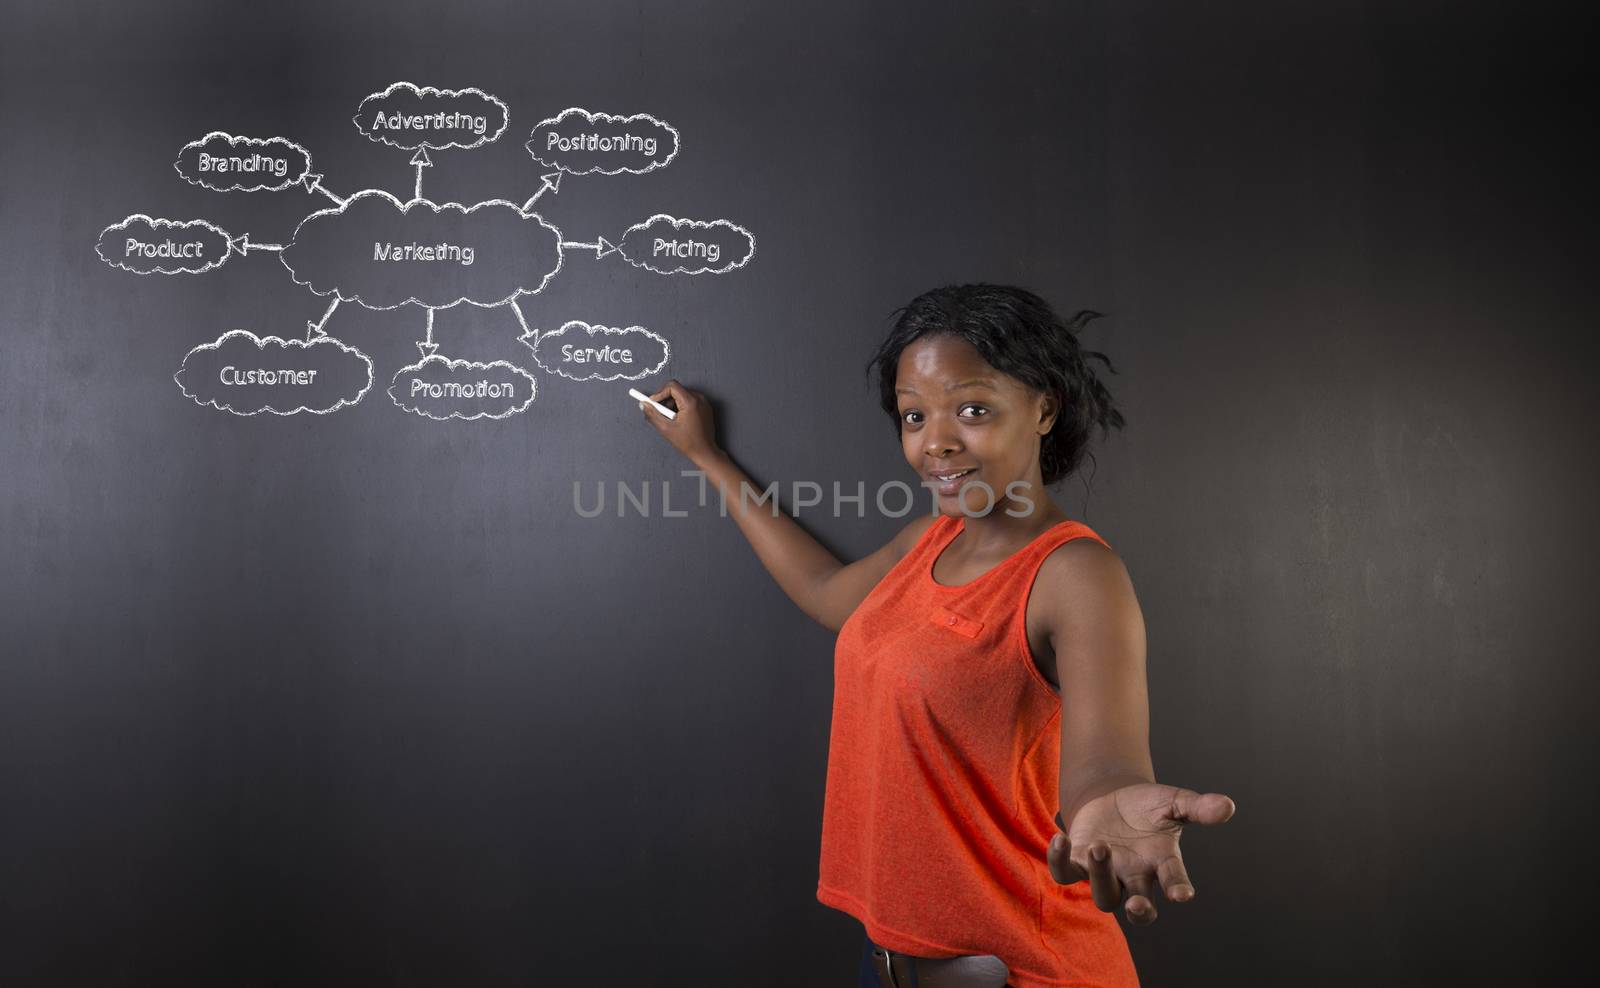 South African or African American woman teacher or student against blackboard background with chalk marketing diagram